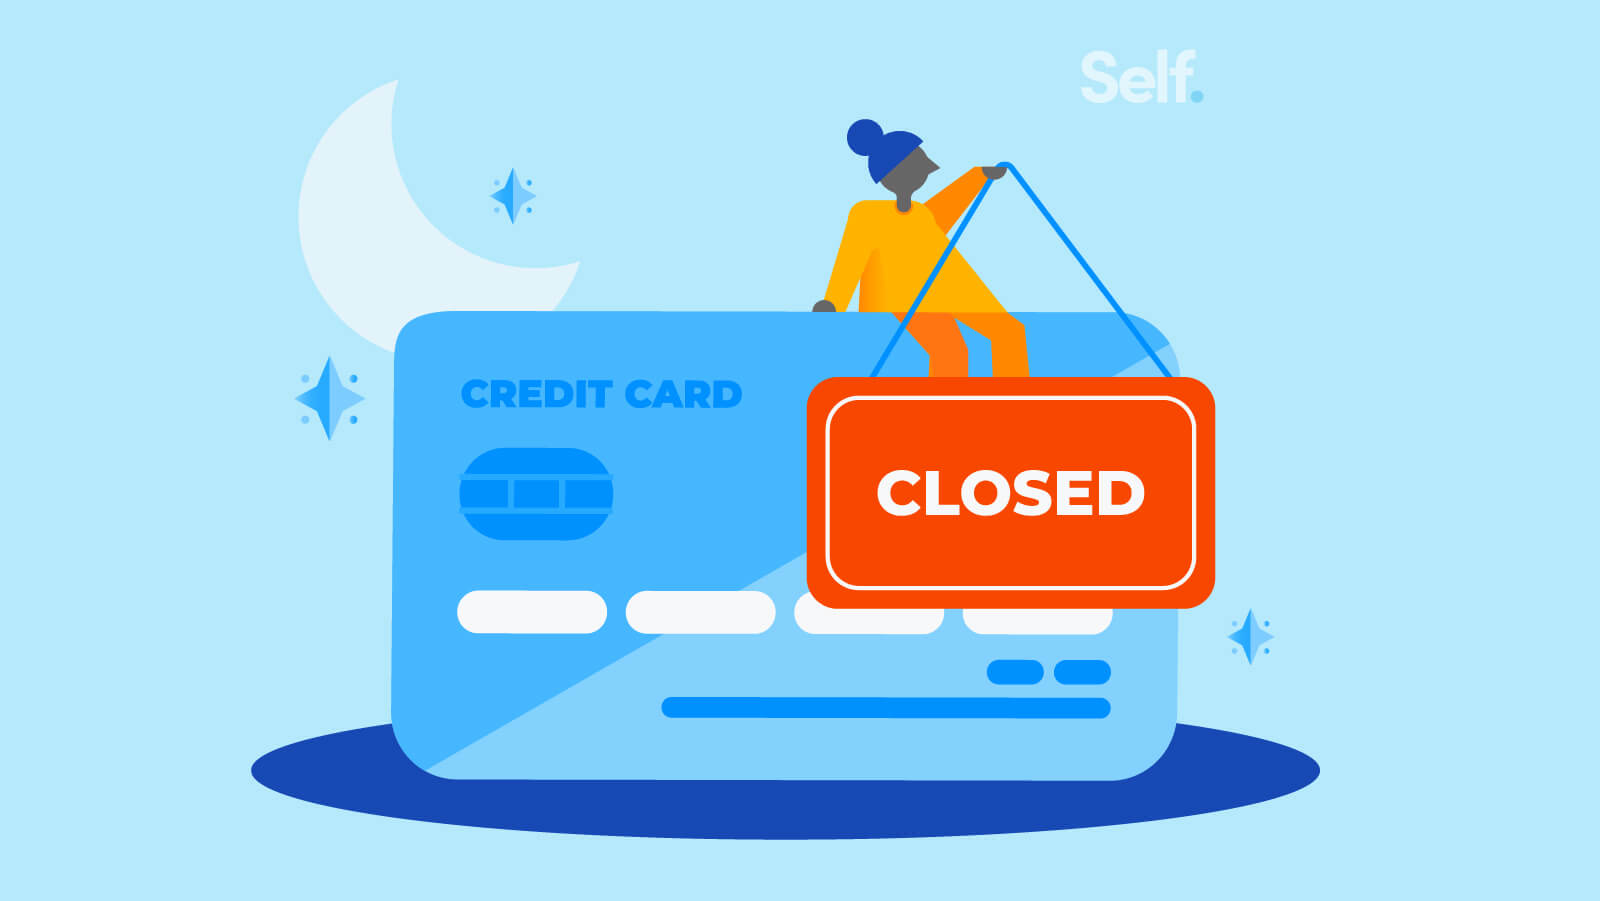 How To Safely Close A Credit Card